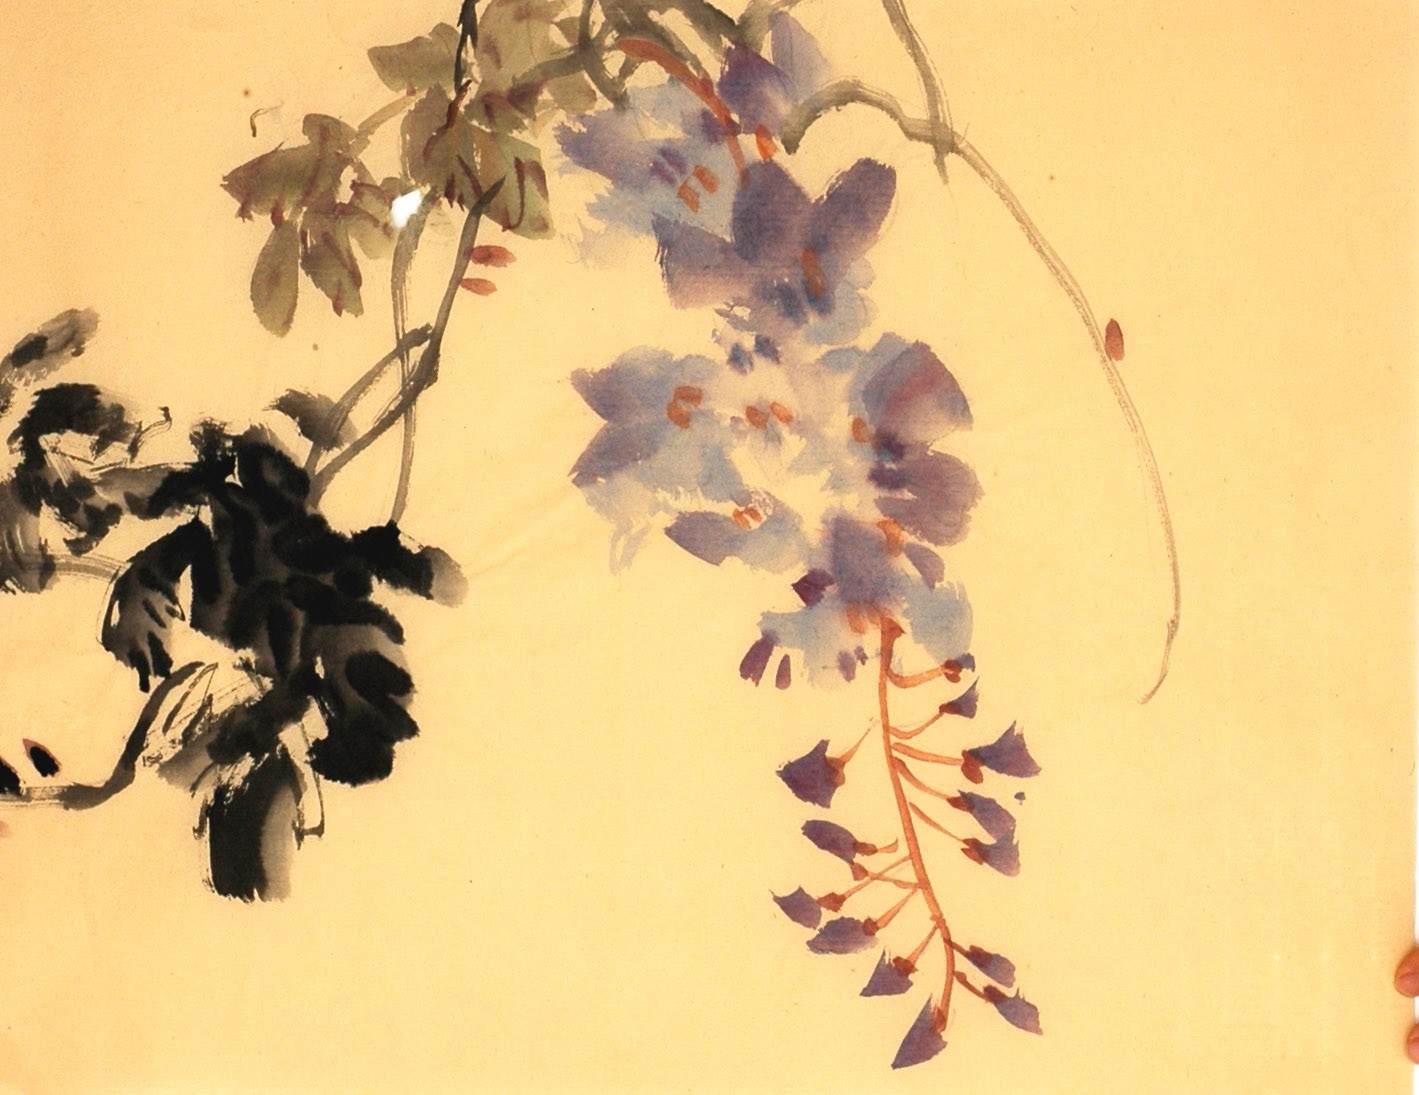 Chinese Flowers&Trees Painting - CNAG012566